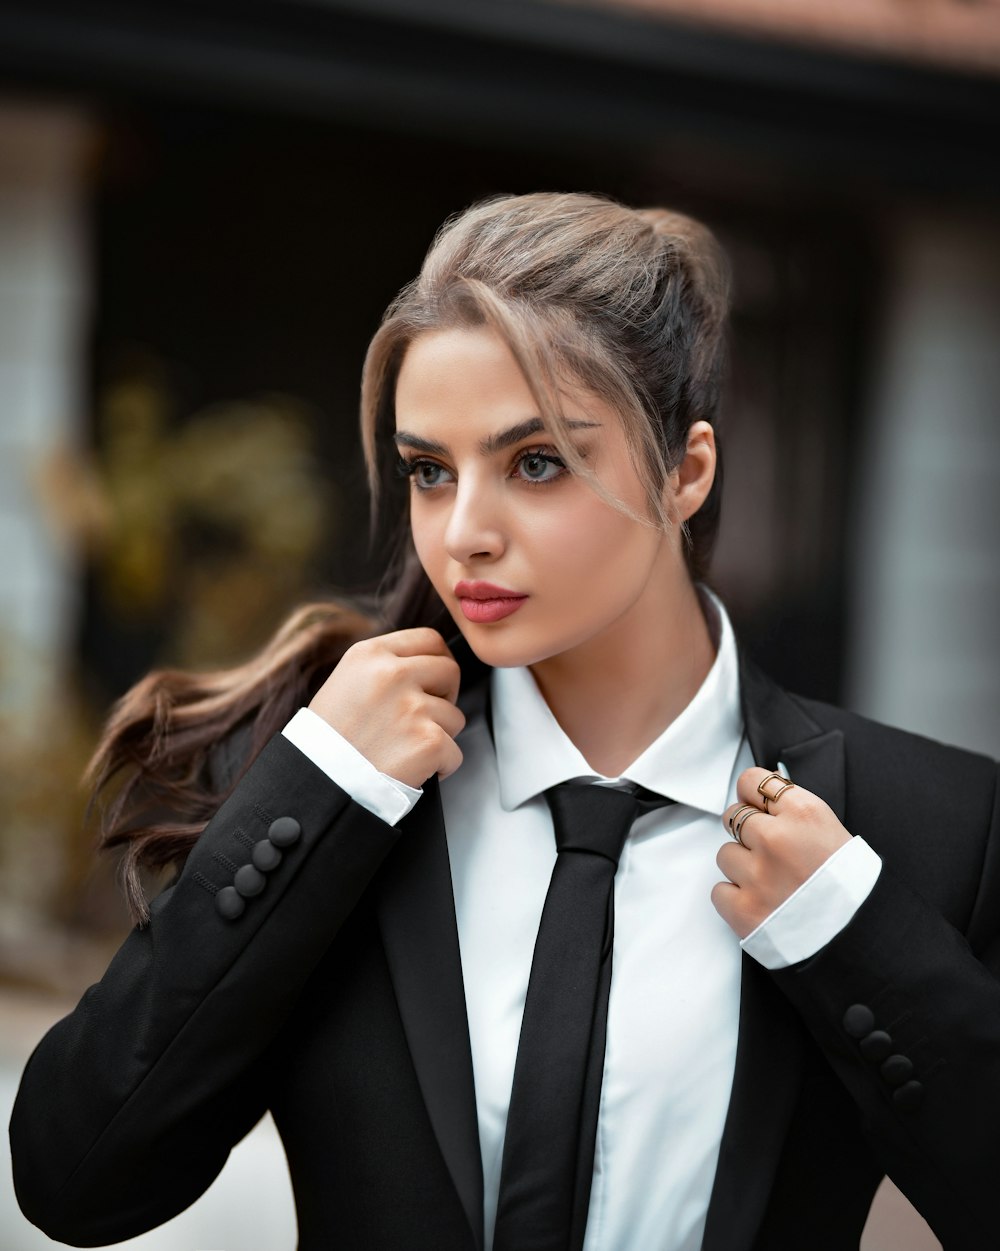 a woman in a suit and tie posing for a picture